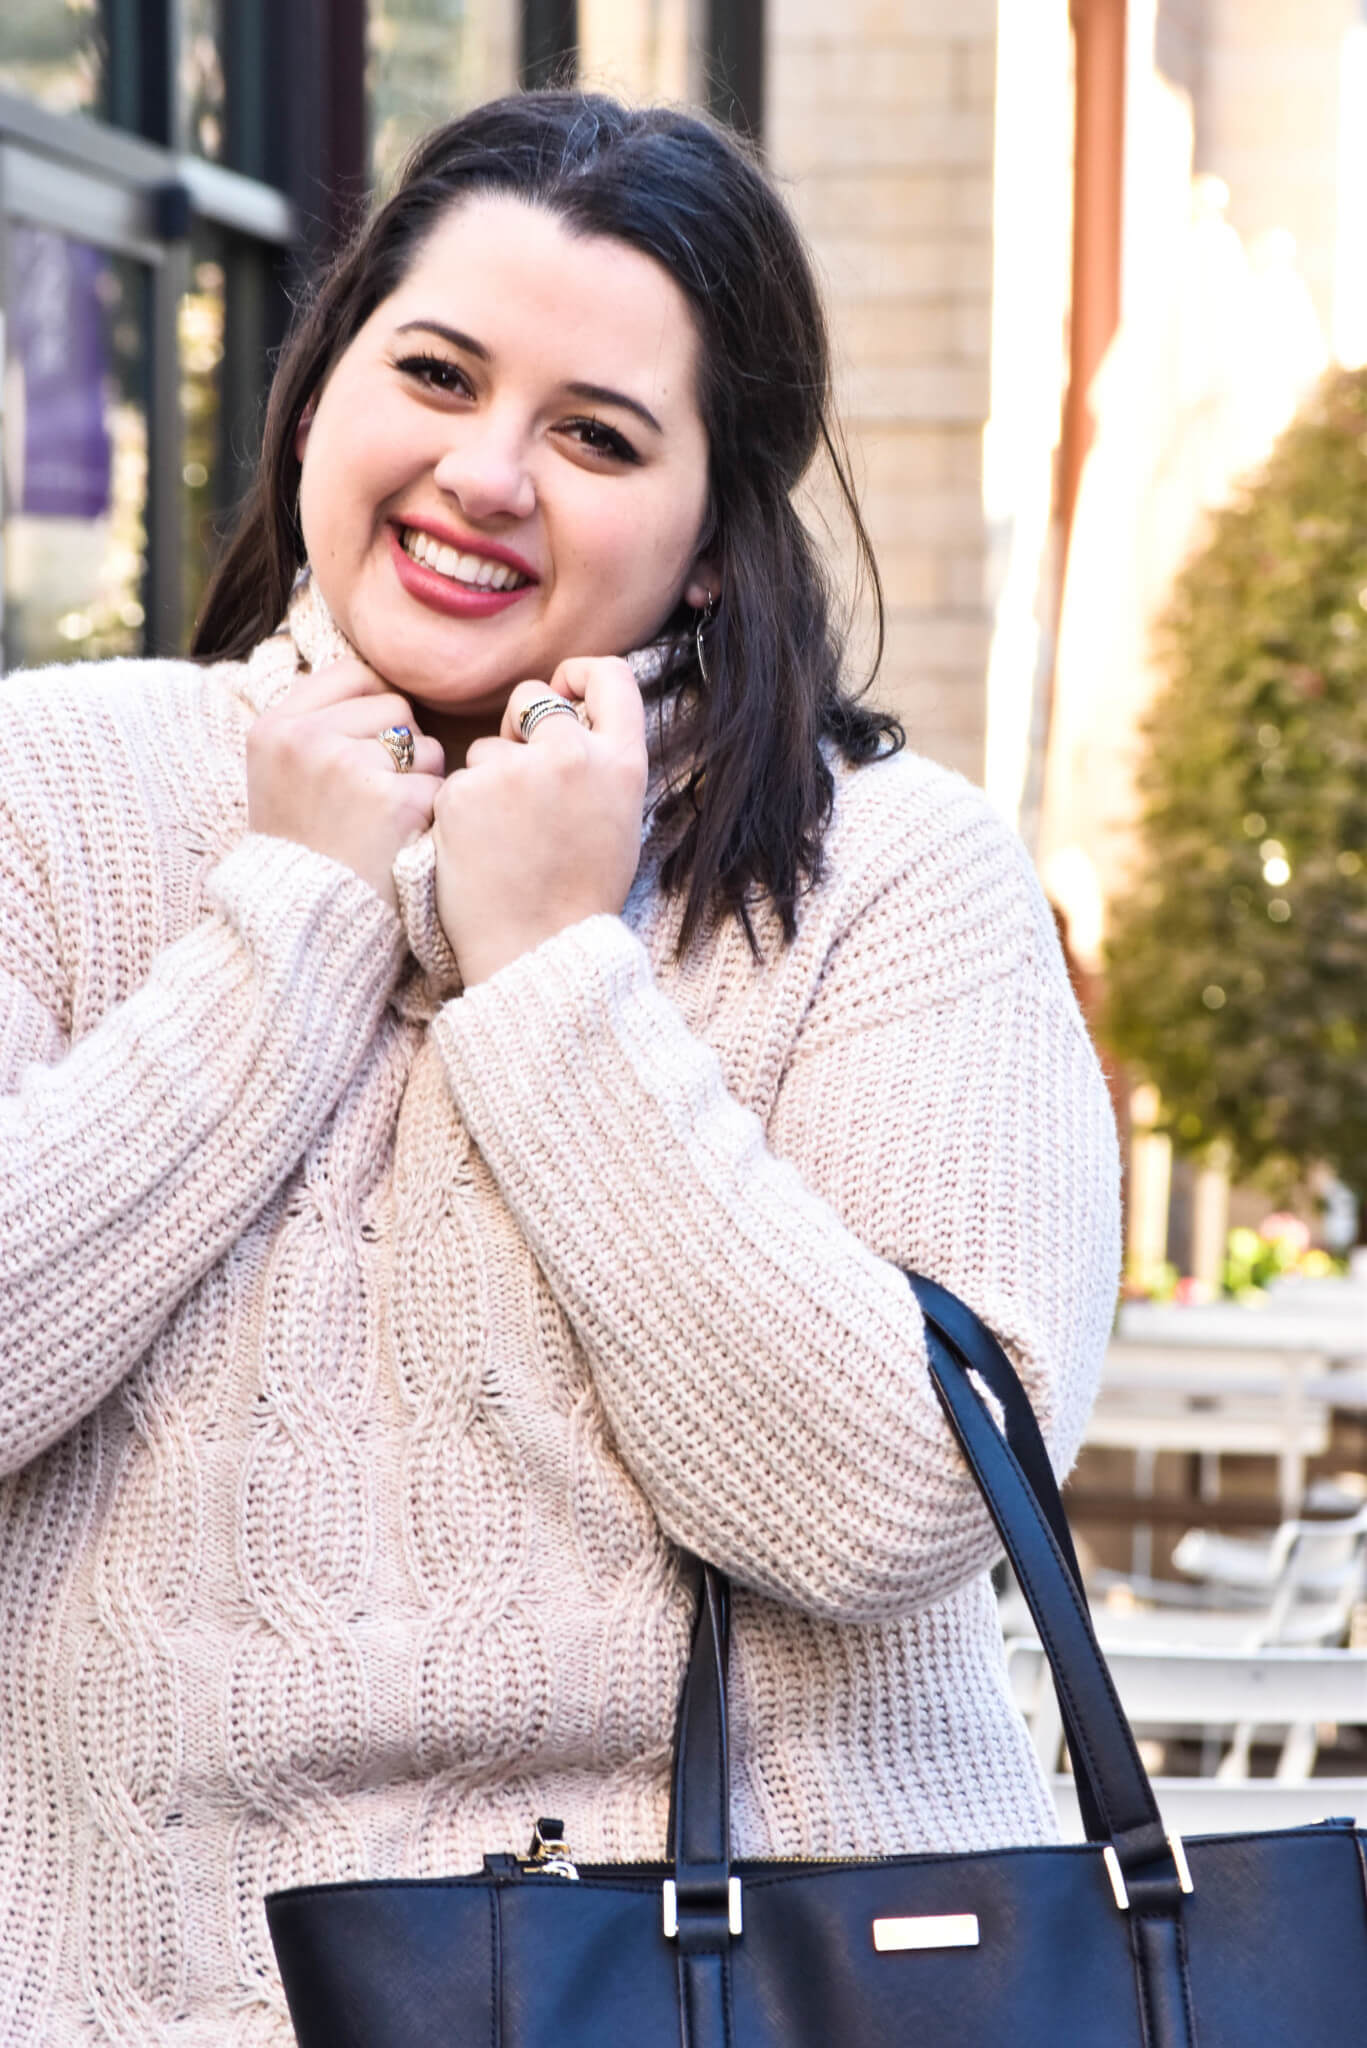 Winter Work Wear | Something Gold, Something Blue - Curvy Style Blog | What to wear to work in the cooler months - my recommendation: a turtlneck and colored slacks